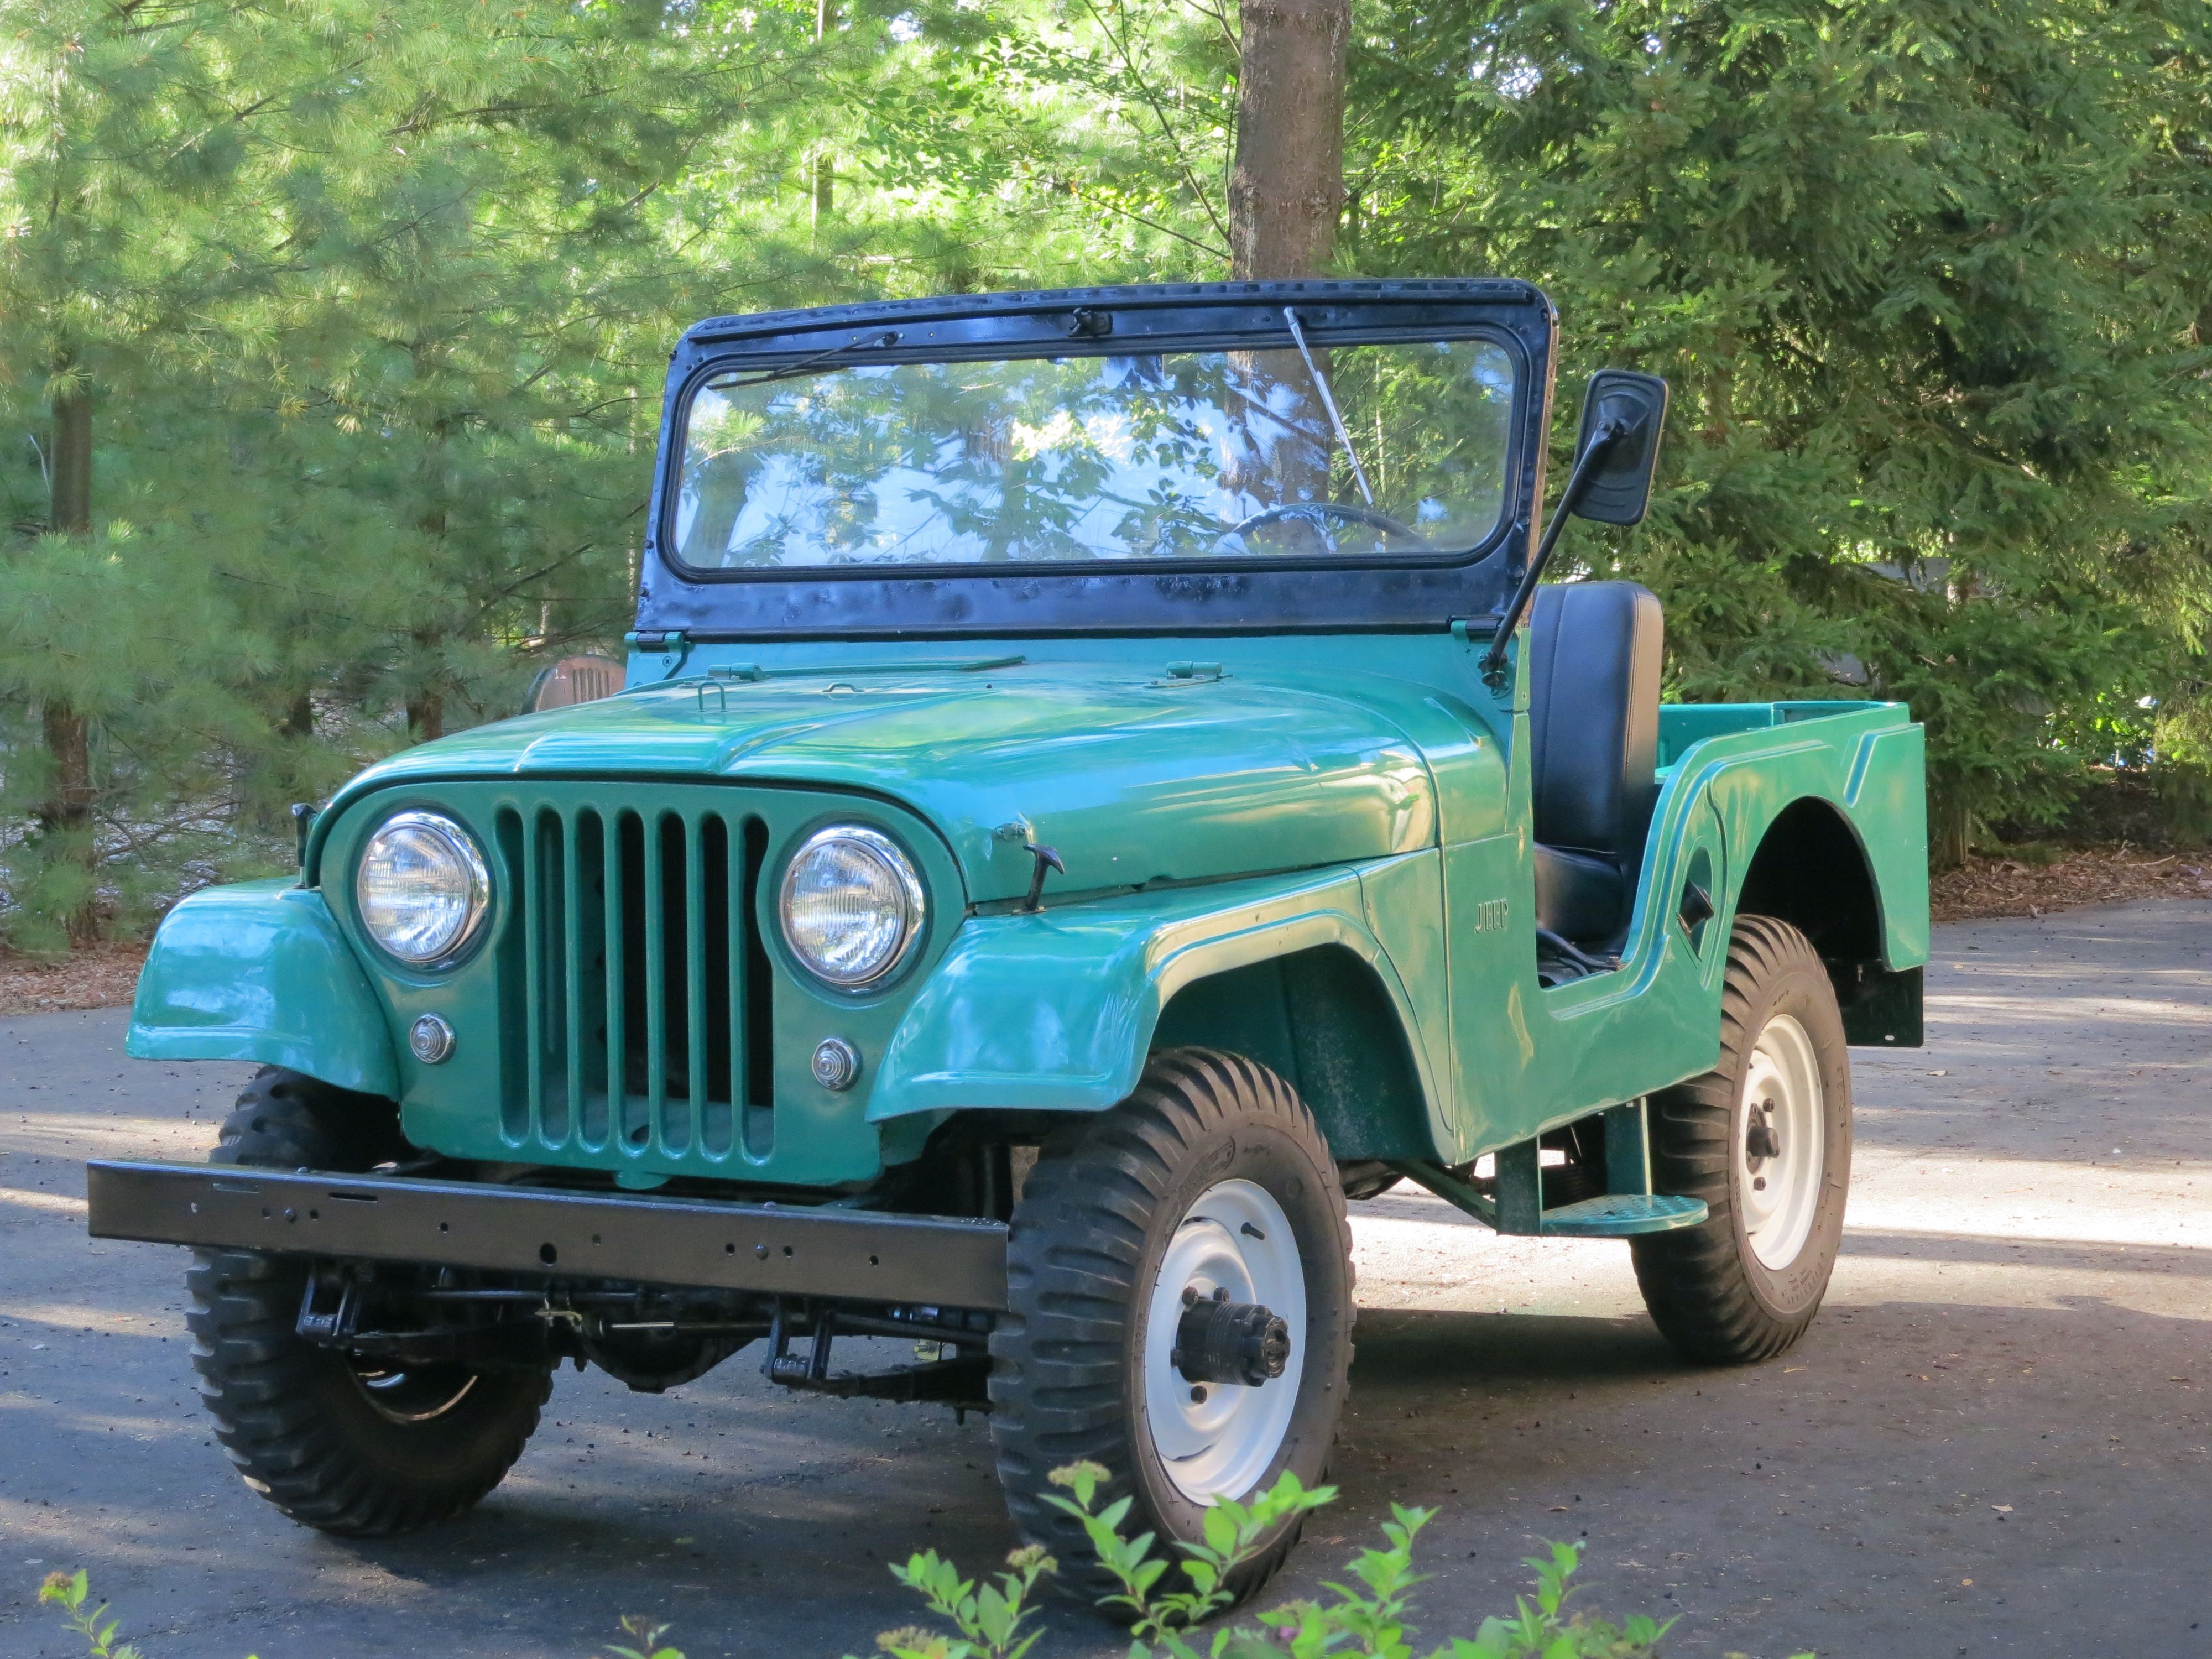 Willys-Jeep CJ-5 parked outside